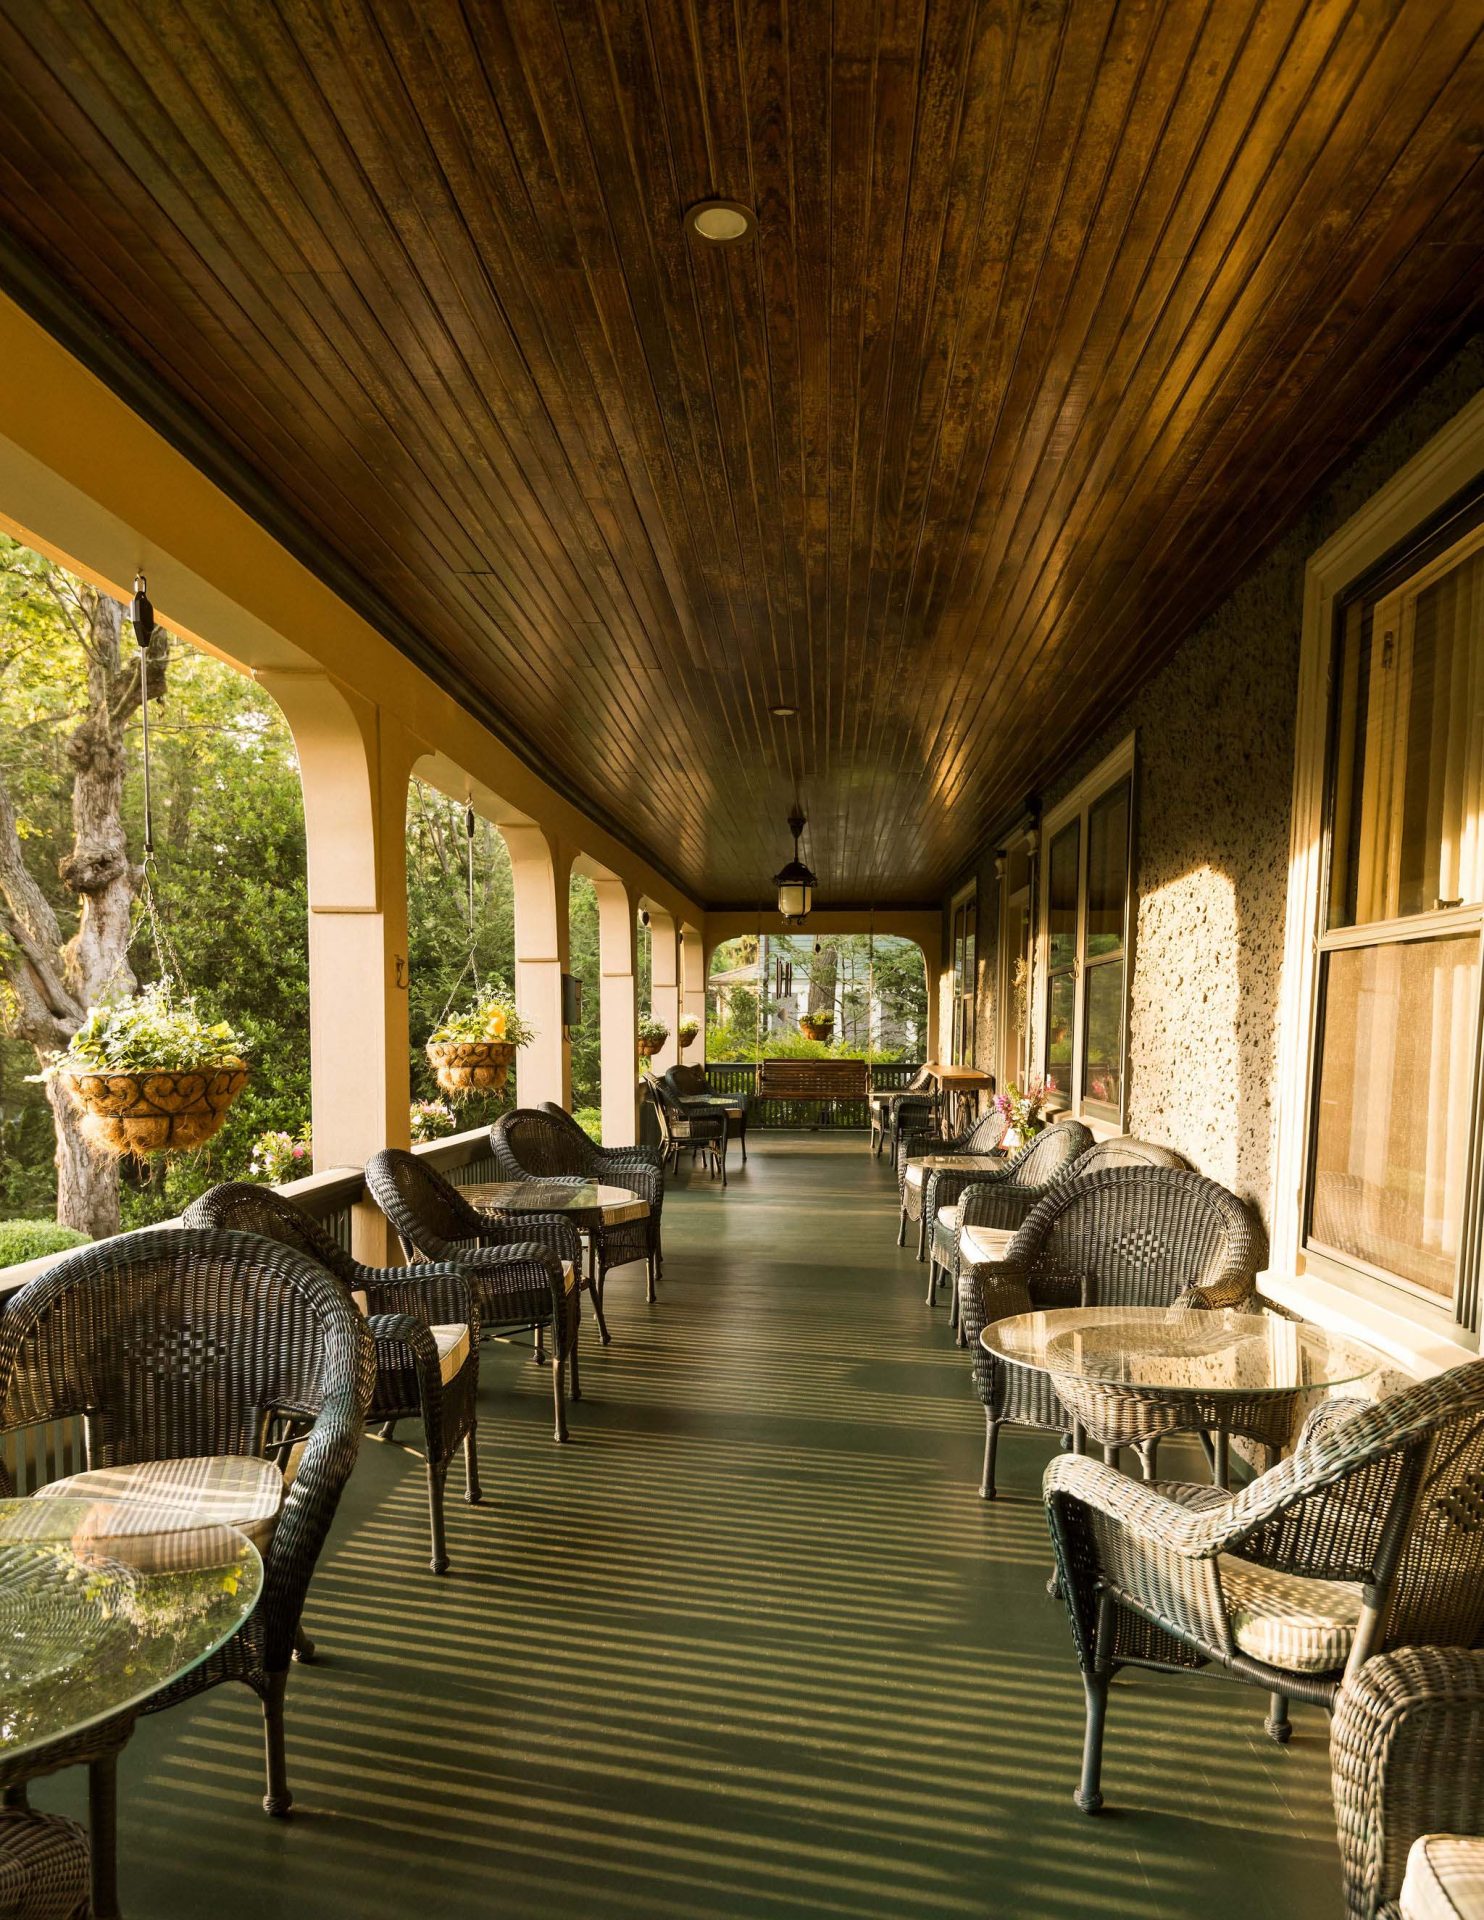 The front porch of the Inn with a wooden brown ceiling and two rows of rattan chairs and tables.